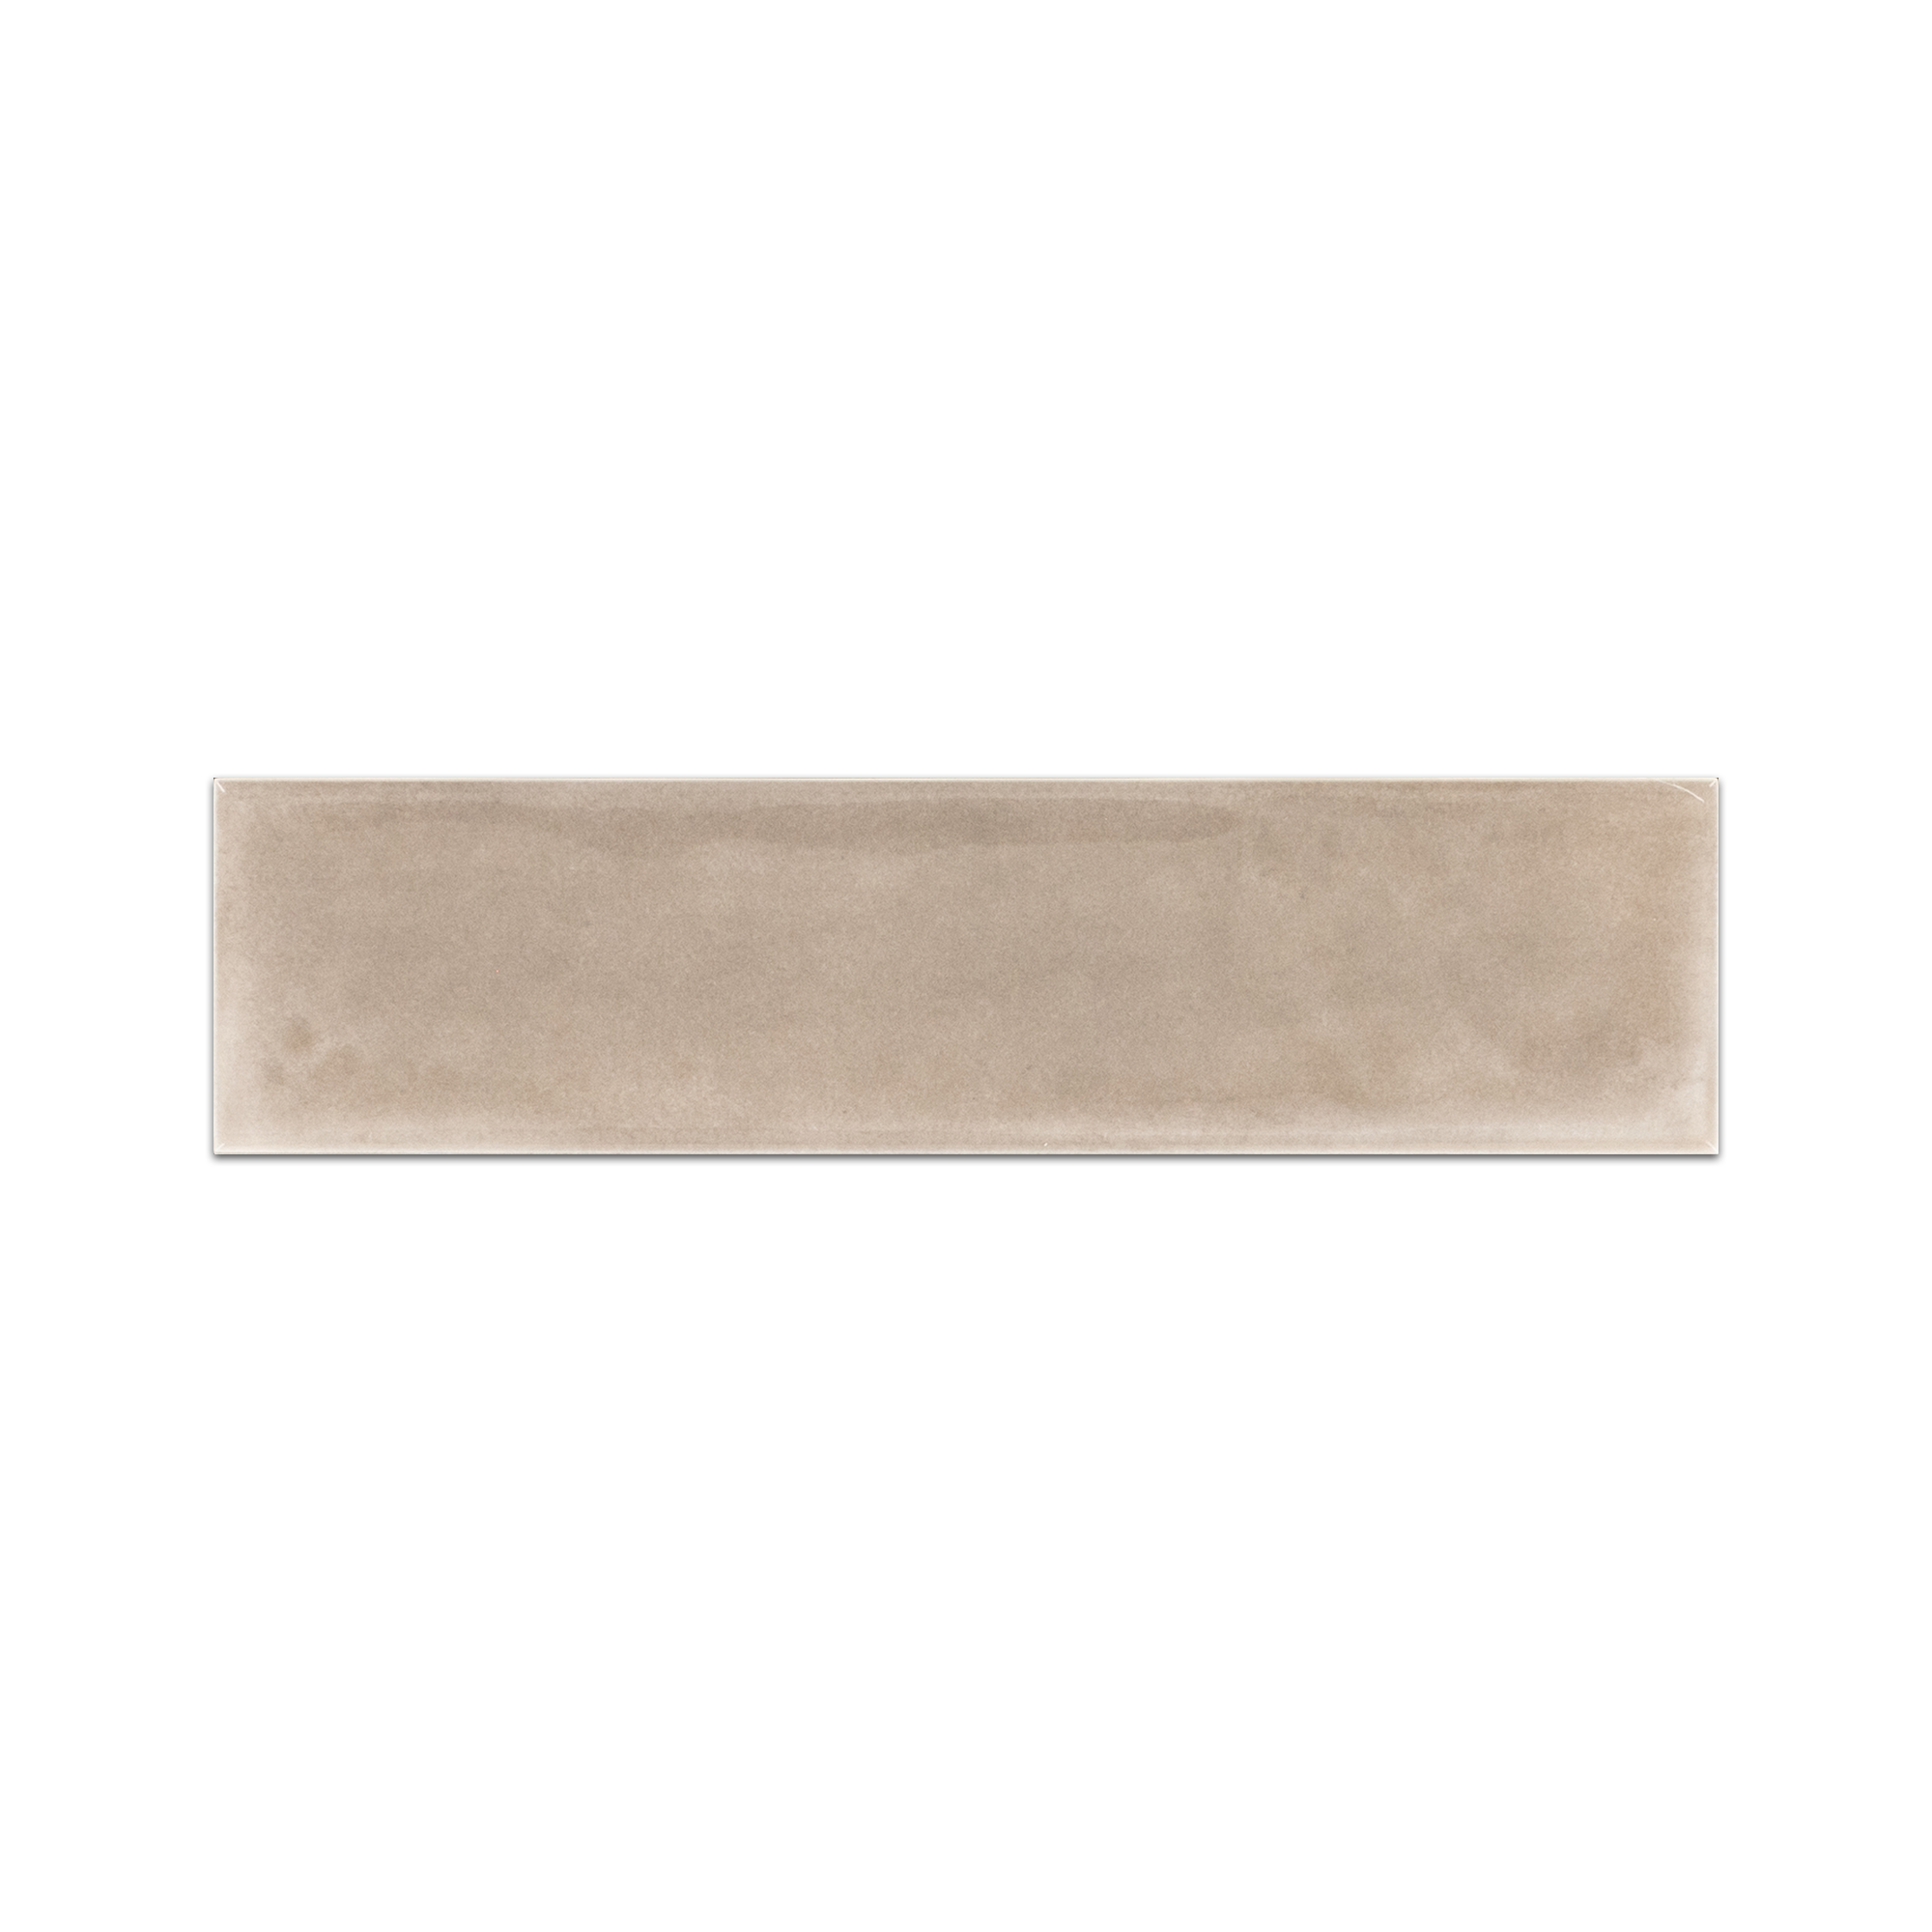 Elon Opal Vision Ceramic Rectangle Wall Tile 3x12x0.3125 Glossy CT140 Surface Group International Product